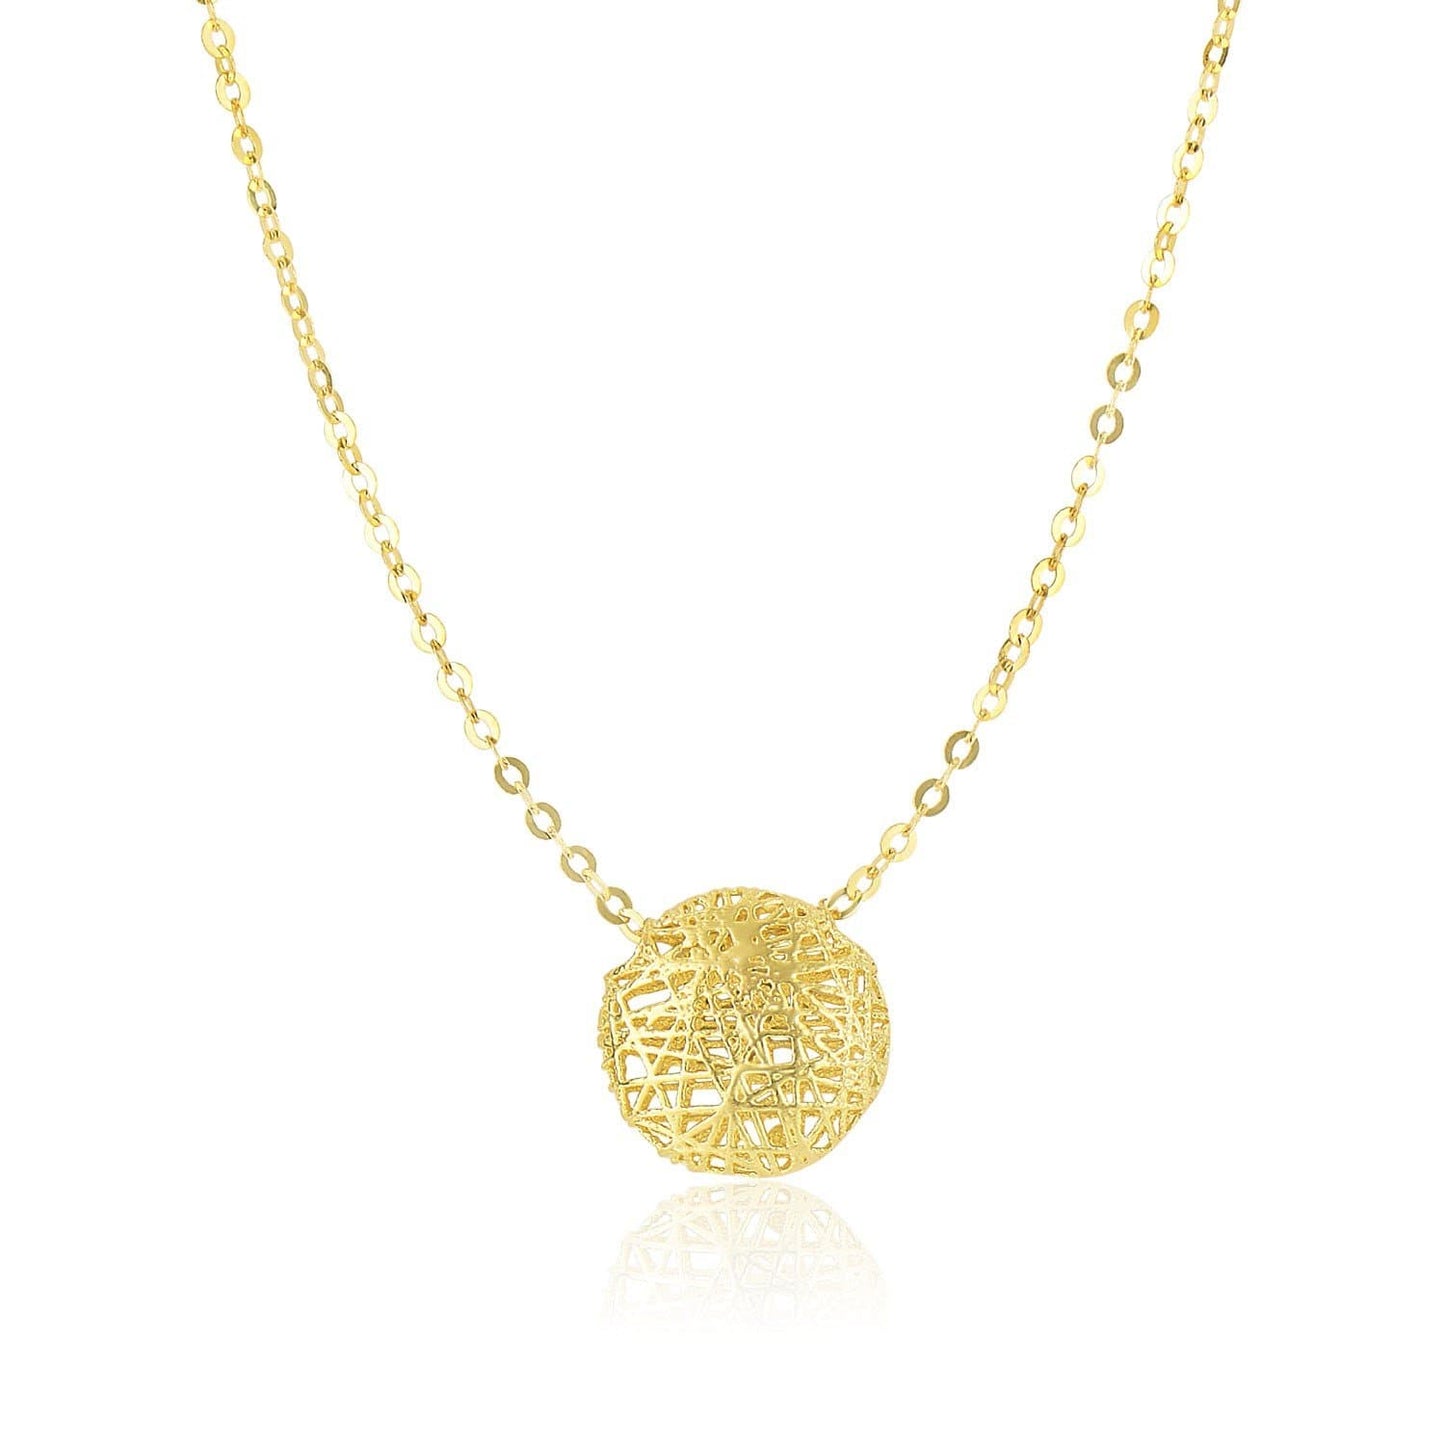 14k Yellow Gold Mesh Style Puffed Round Necklace